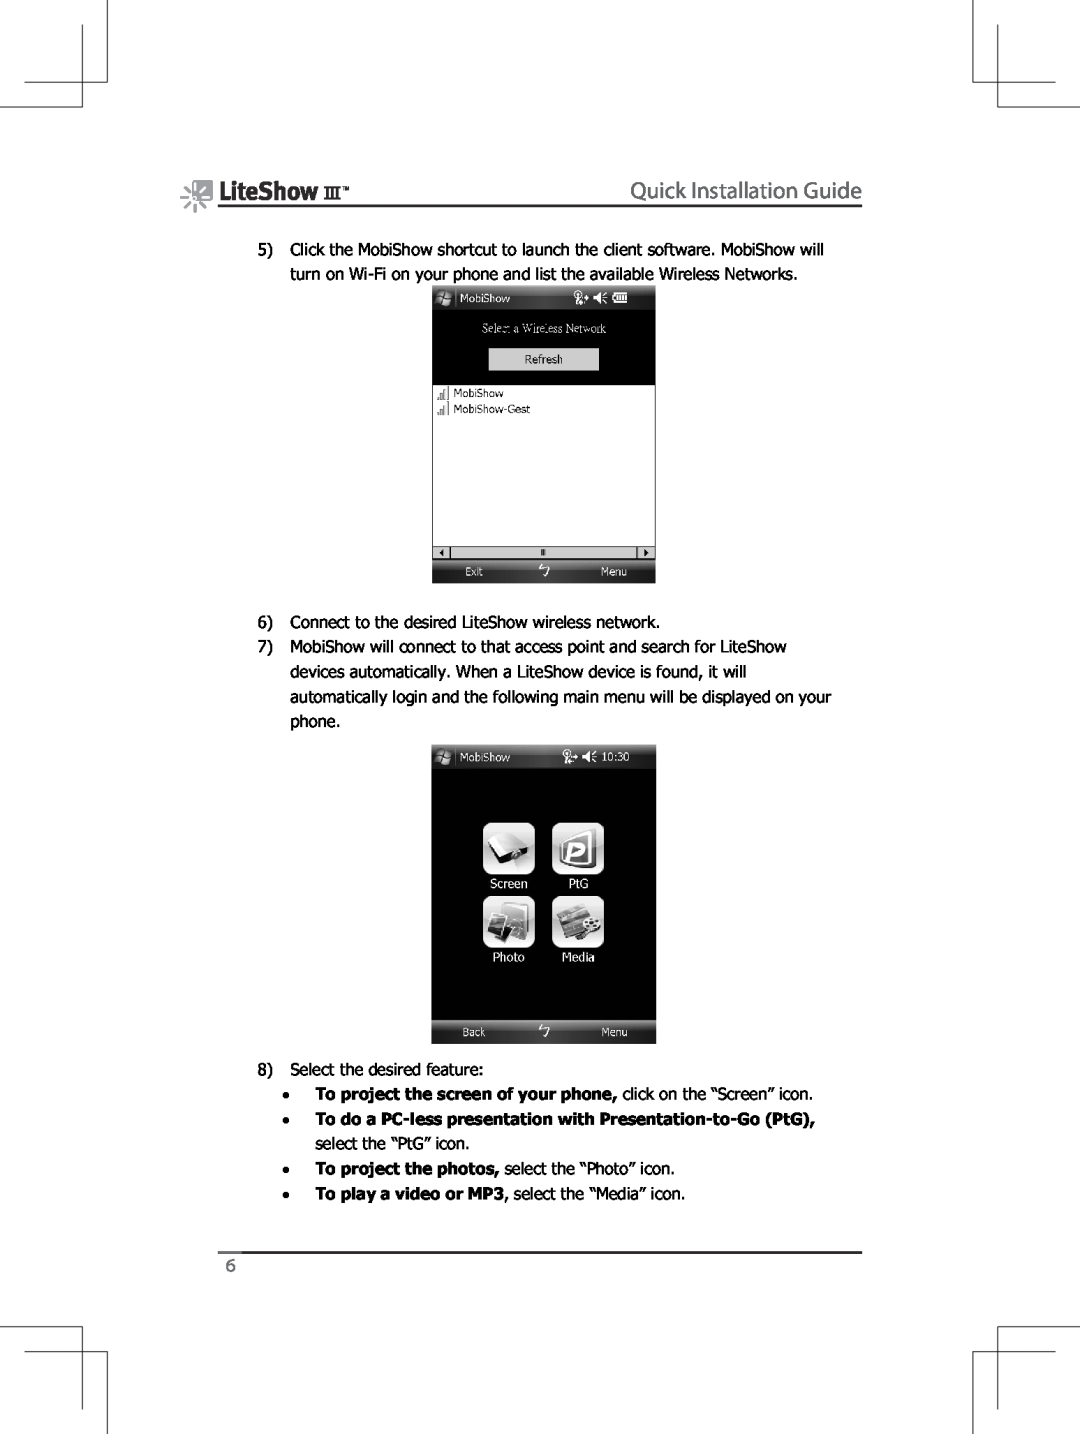 InFocus INLITESHOW3 manual Quick Installation Guide, To project the screen of your phone, click on the “Screen” icon 